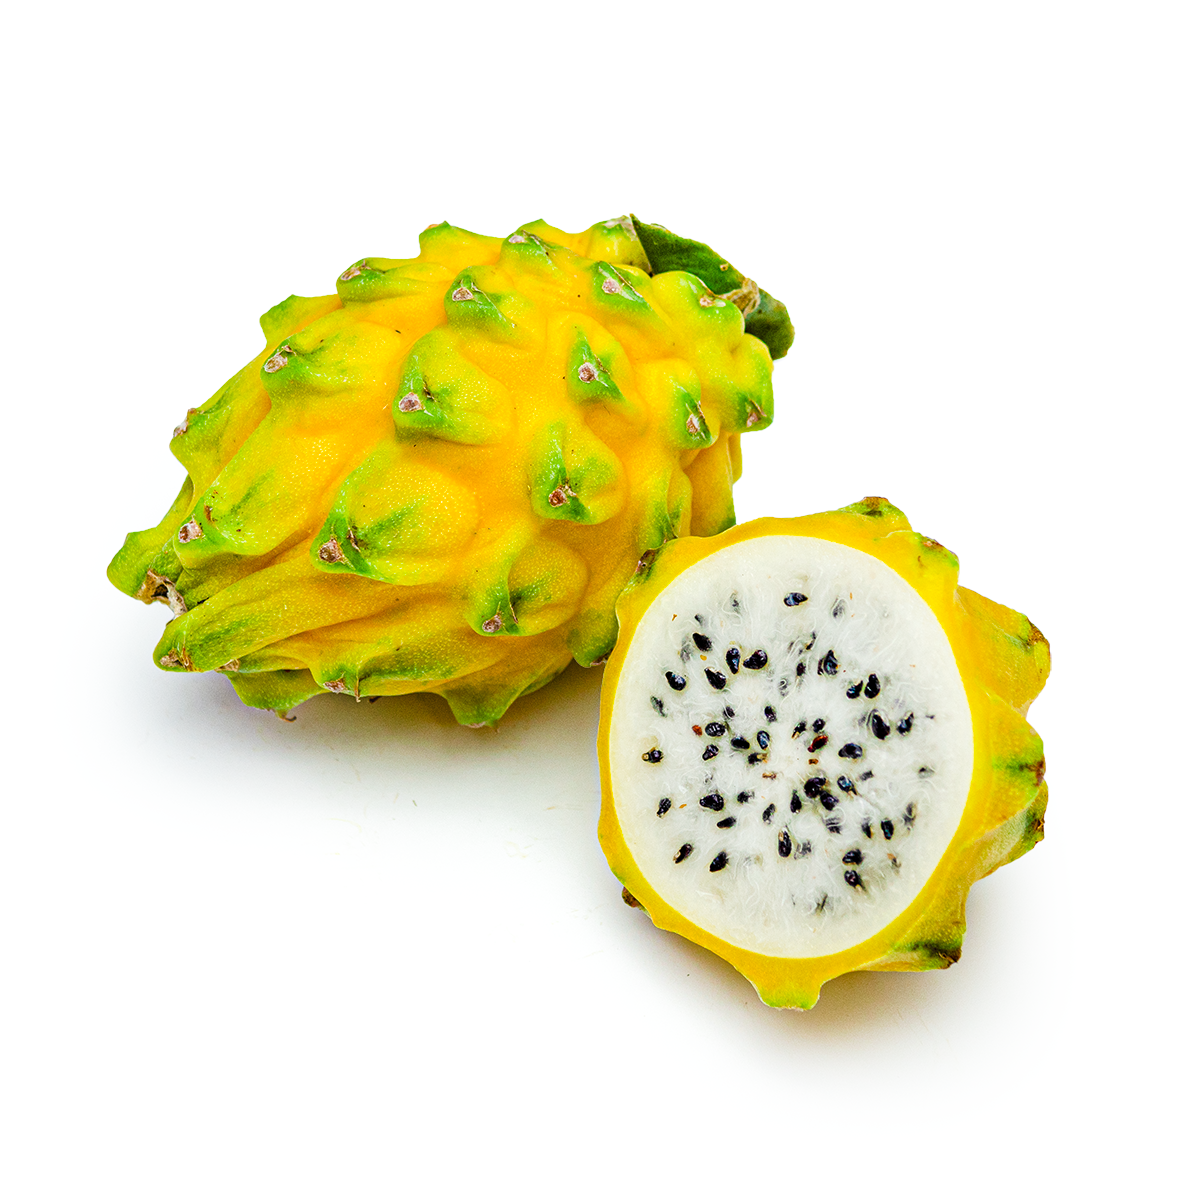 All Tropical Fruit